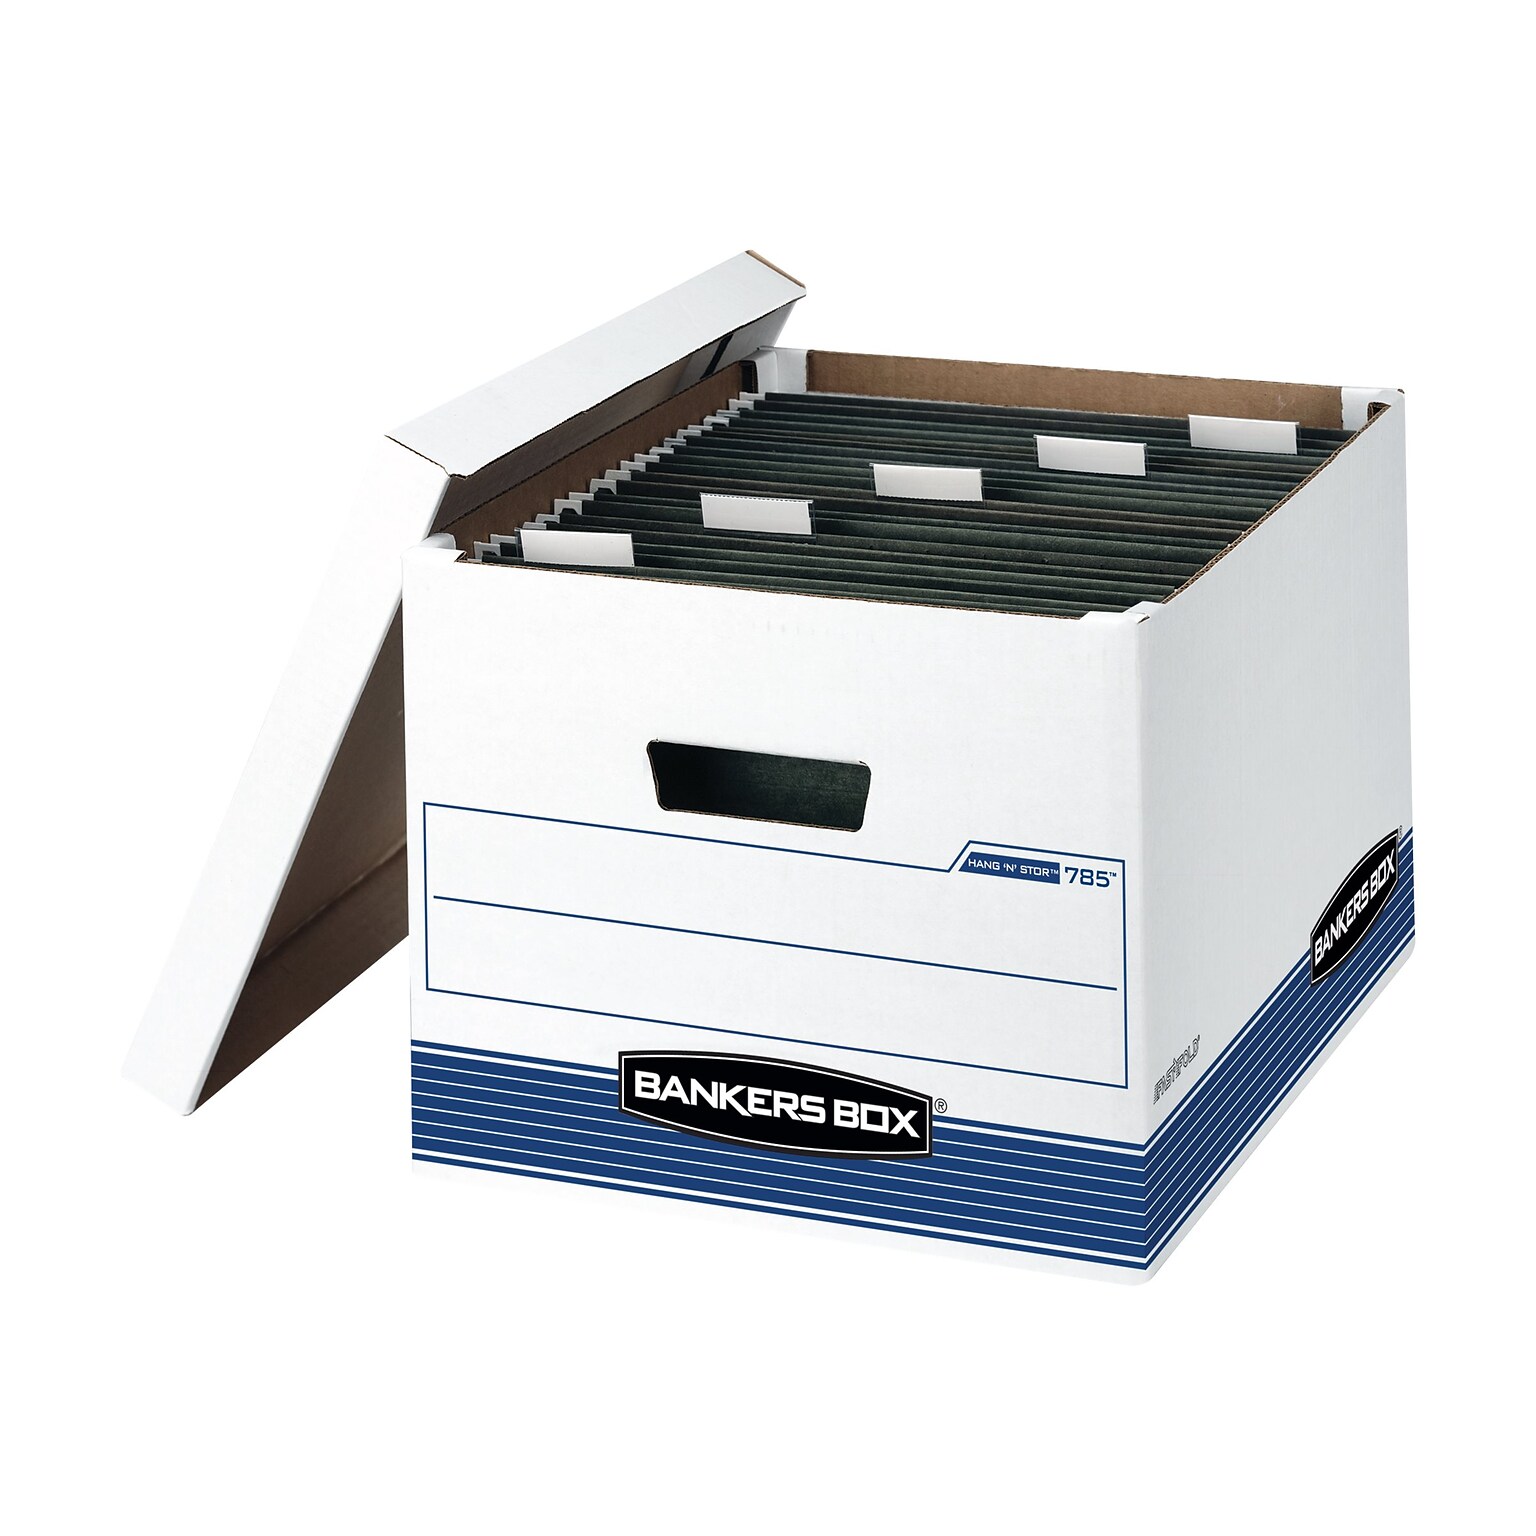 Bankers Box Medium-Duty FastFold Corrugated File Boxes, Lift-off Lid, Letter/Legal Size, White/Blue, 4/Carton (00785)